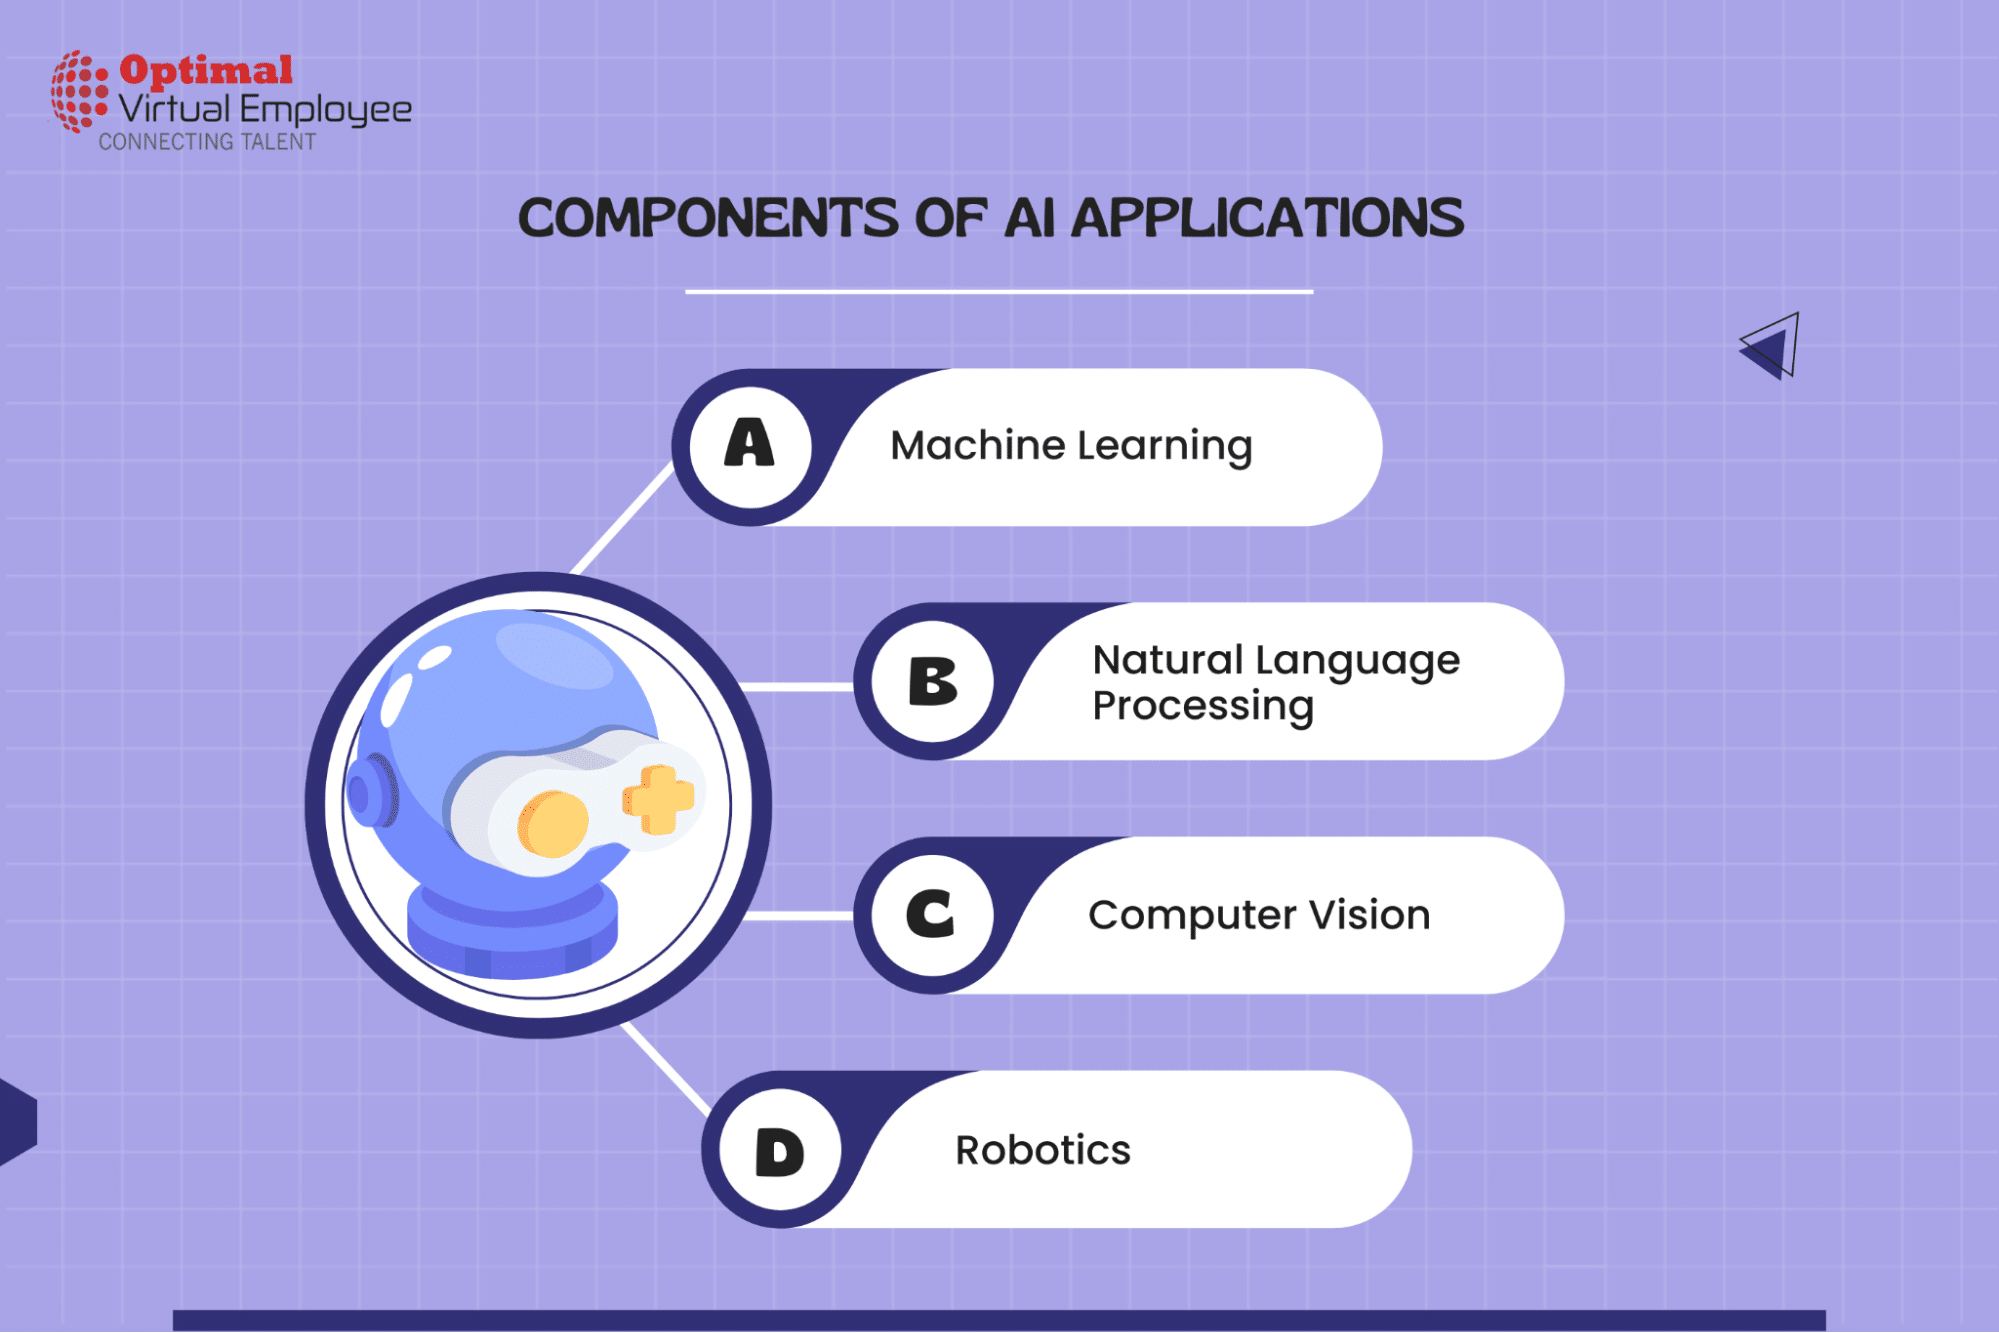 Components of AI Applications